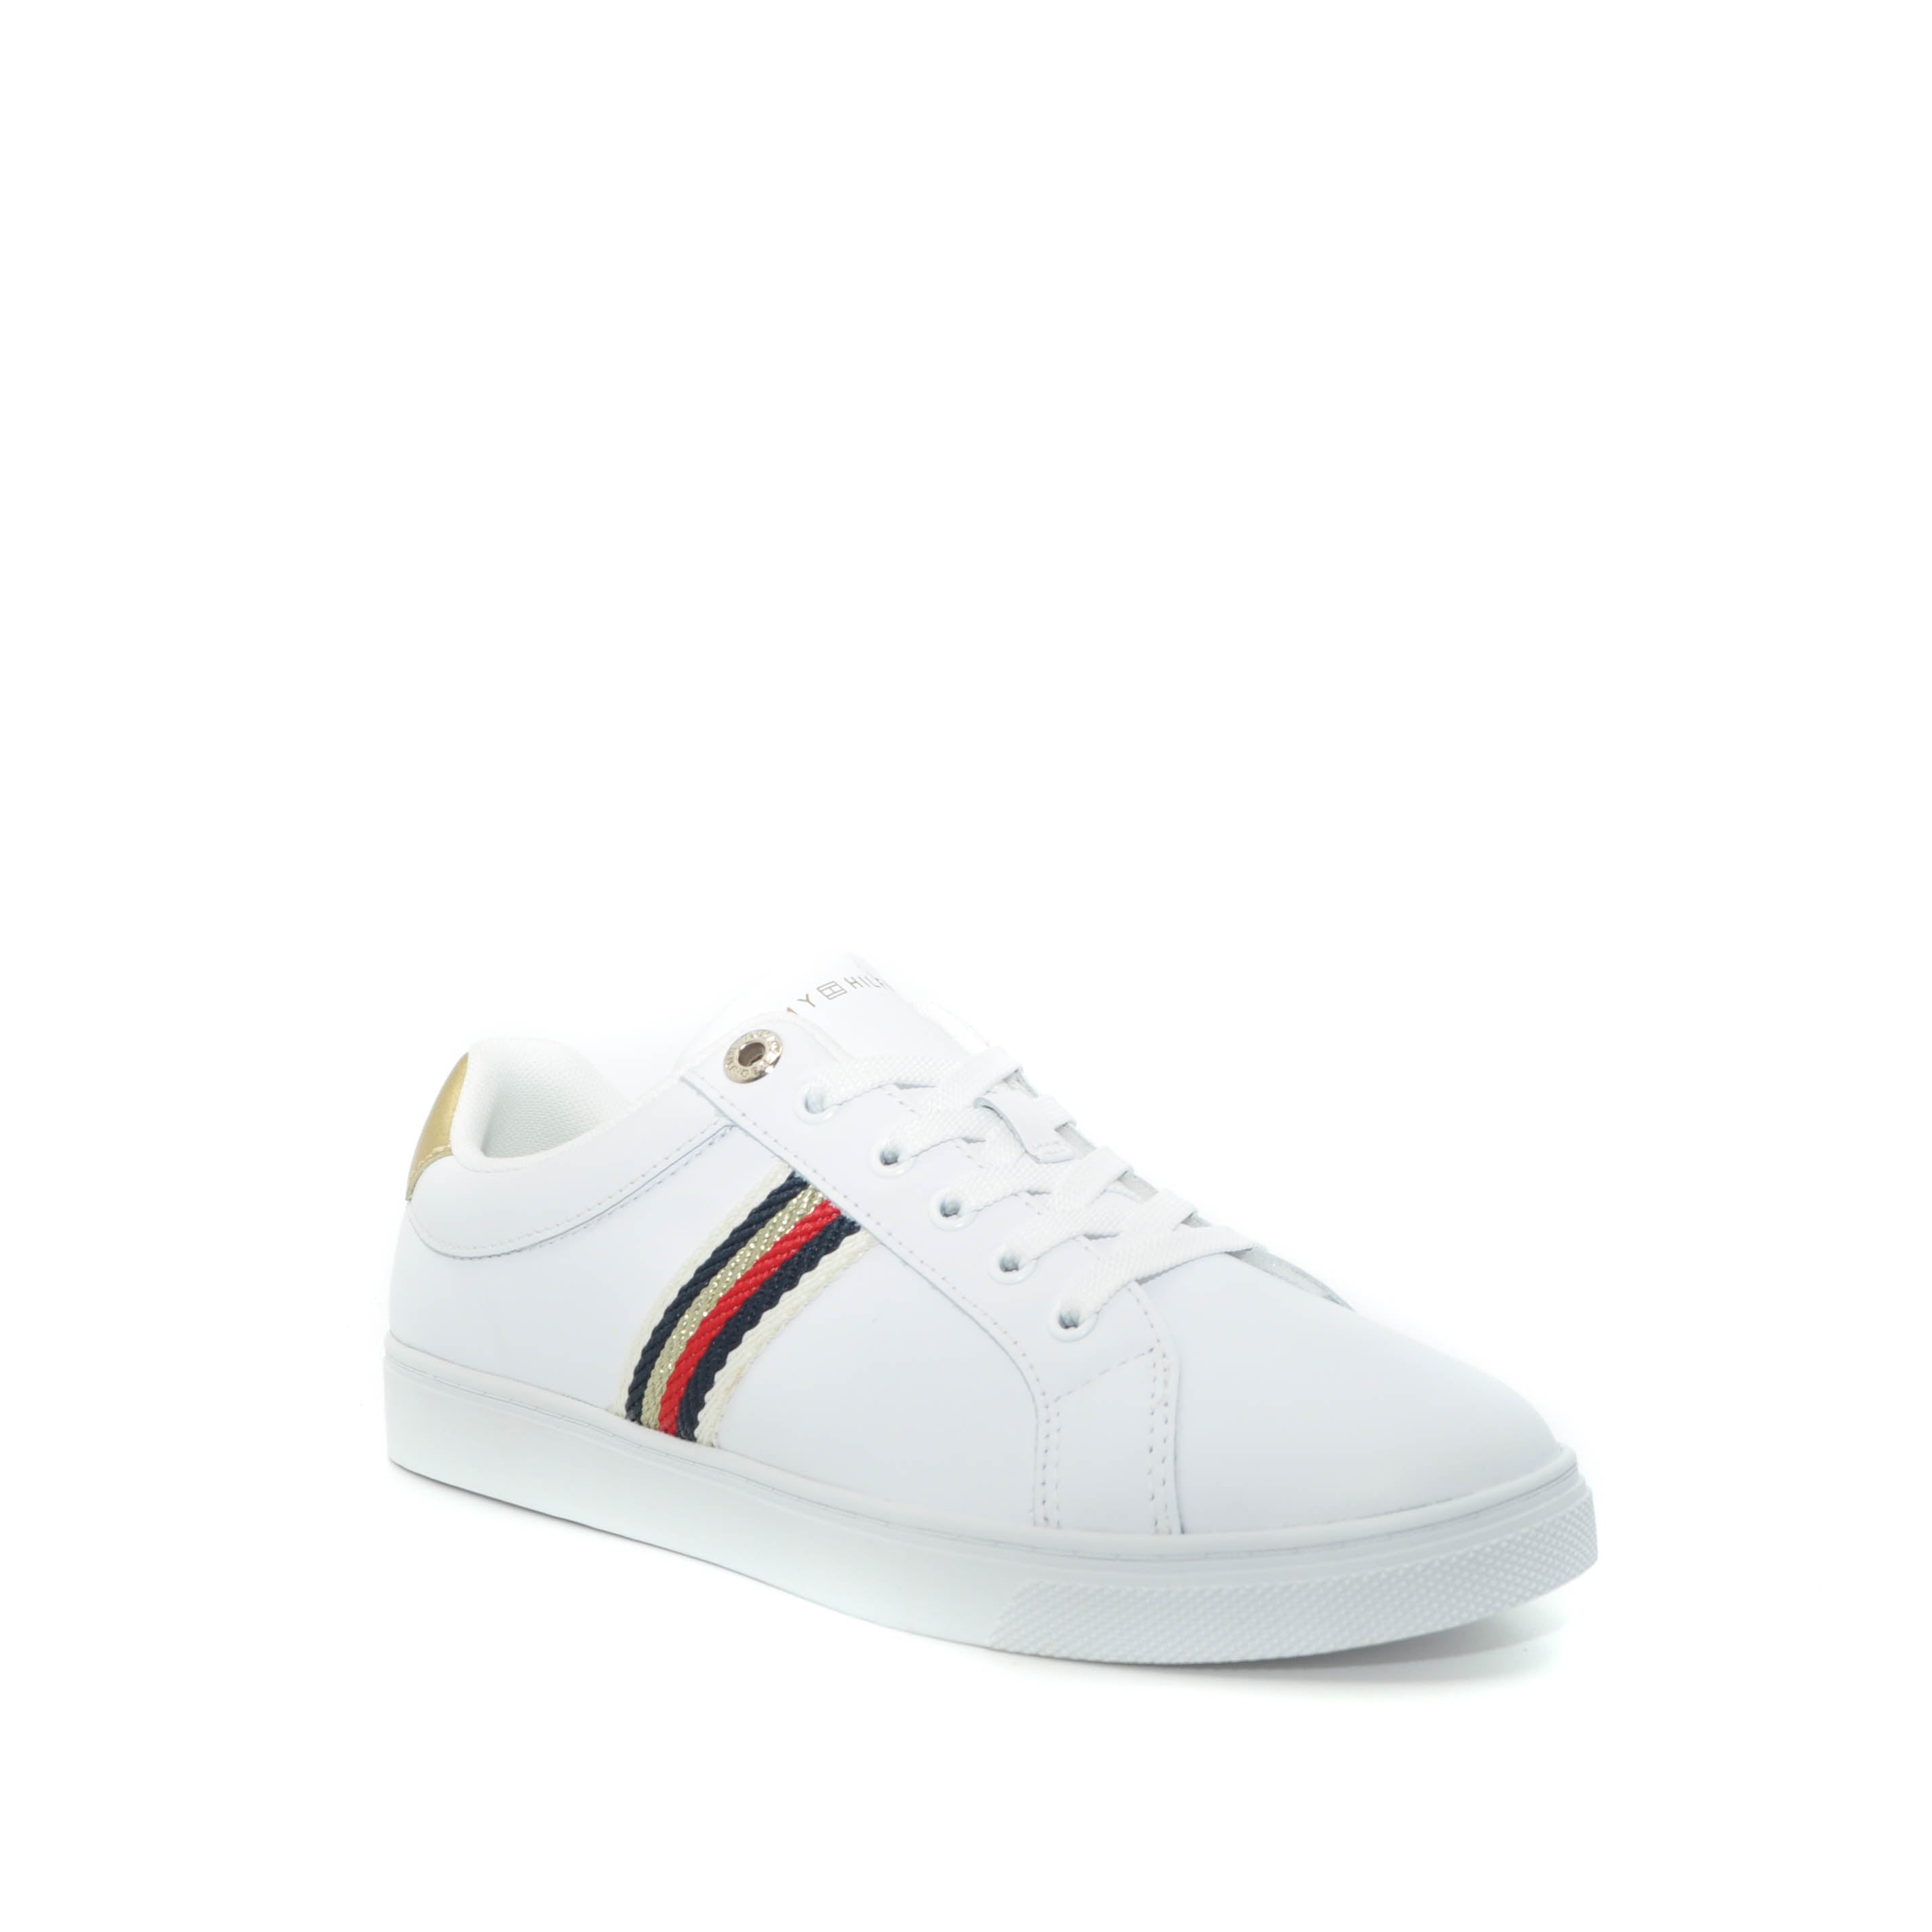 tommy hilfiger white trainers to wear with dresses